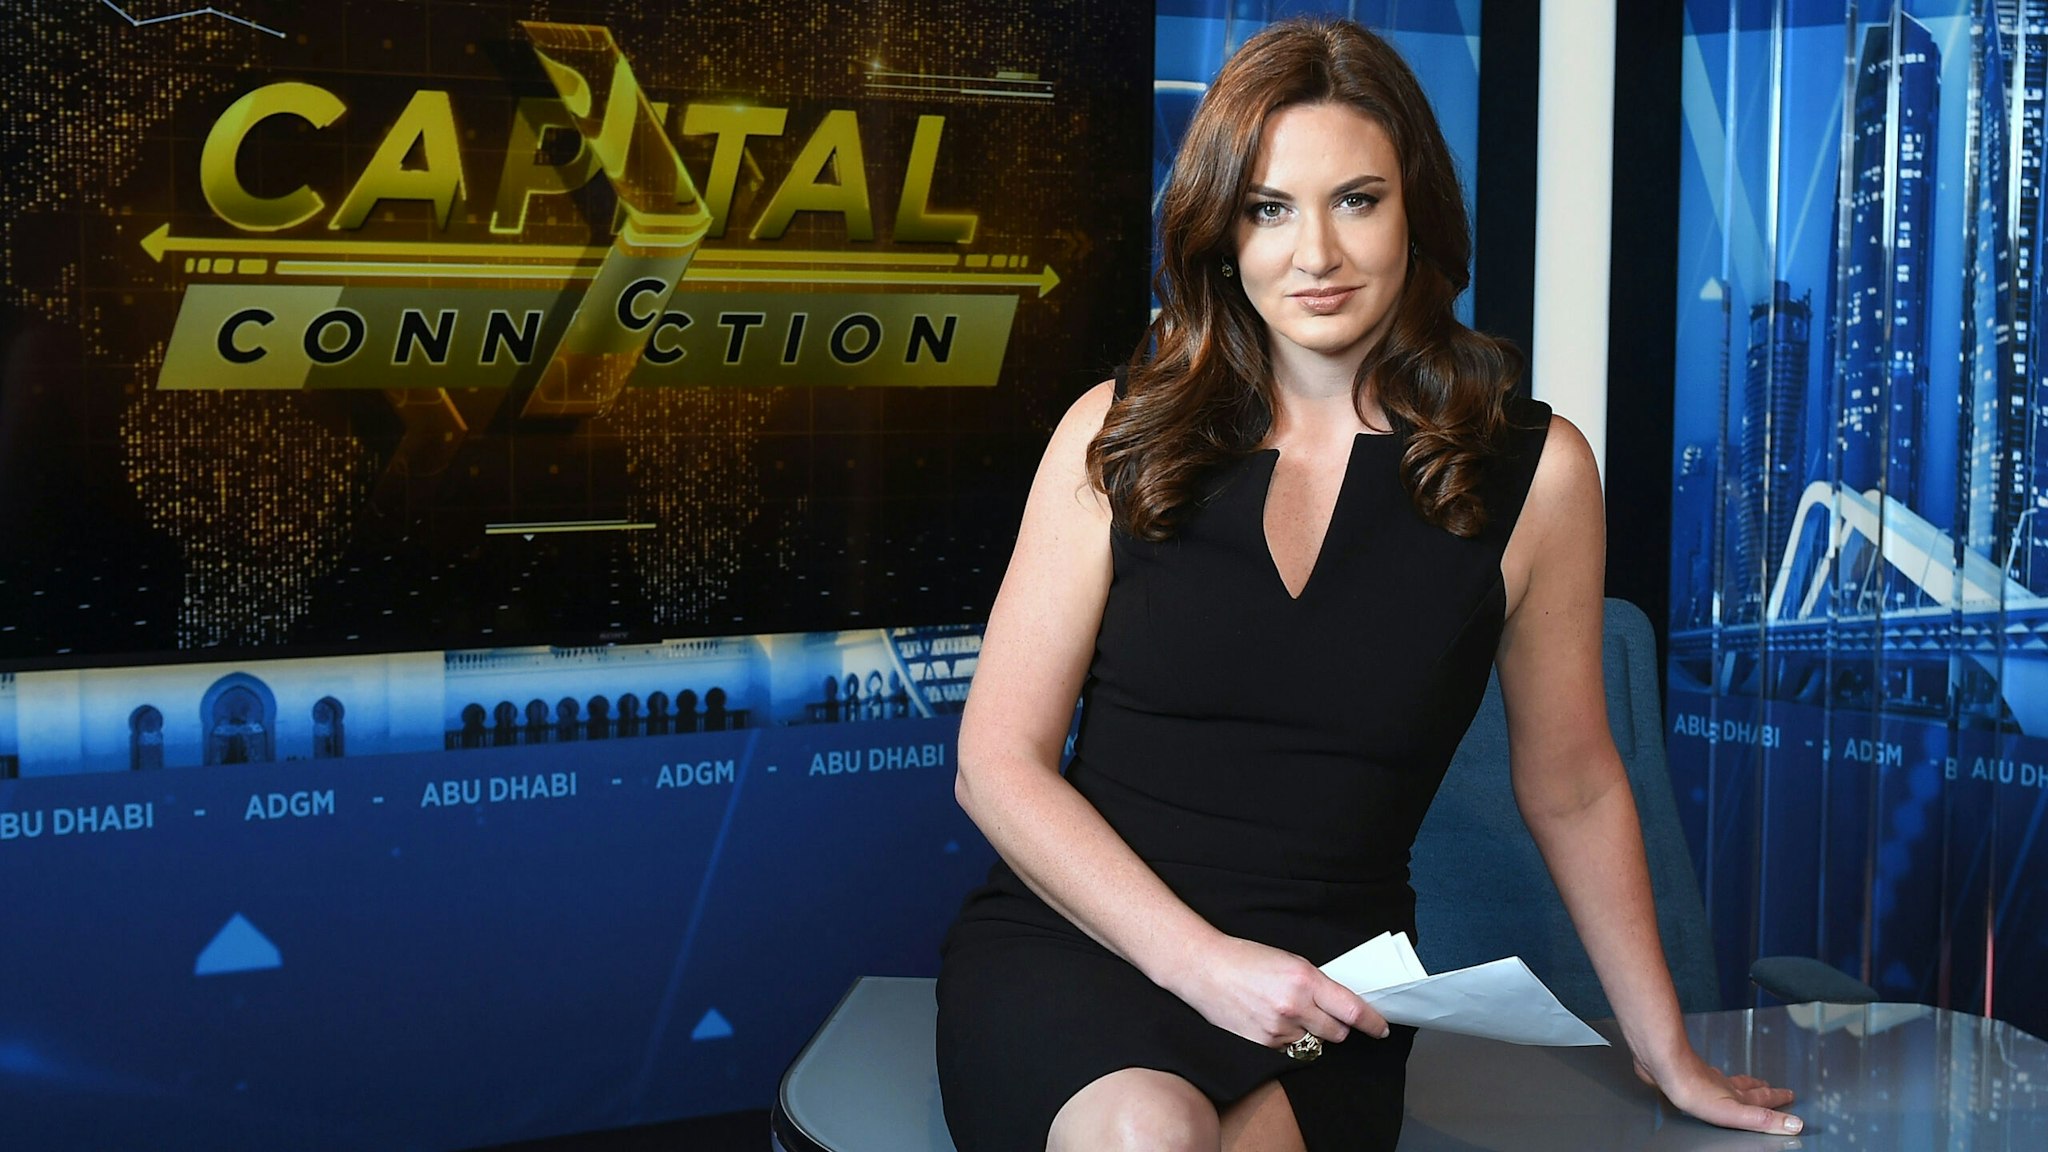 ABU DHABI, UNITED ARAB EMIRATES - APRIL 15: CNBC's Middle East anchor Hadley Gamble at the new Middle East Headquarters Abu Dhabi Global Market on April 15, 2018 in Abu Dhabi, United Arab Emirates.